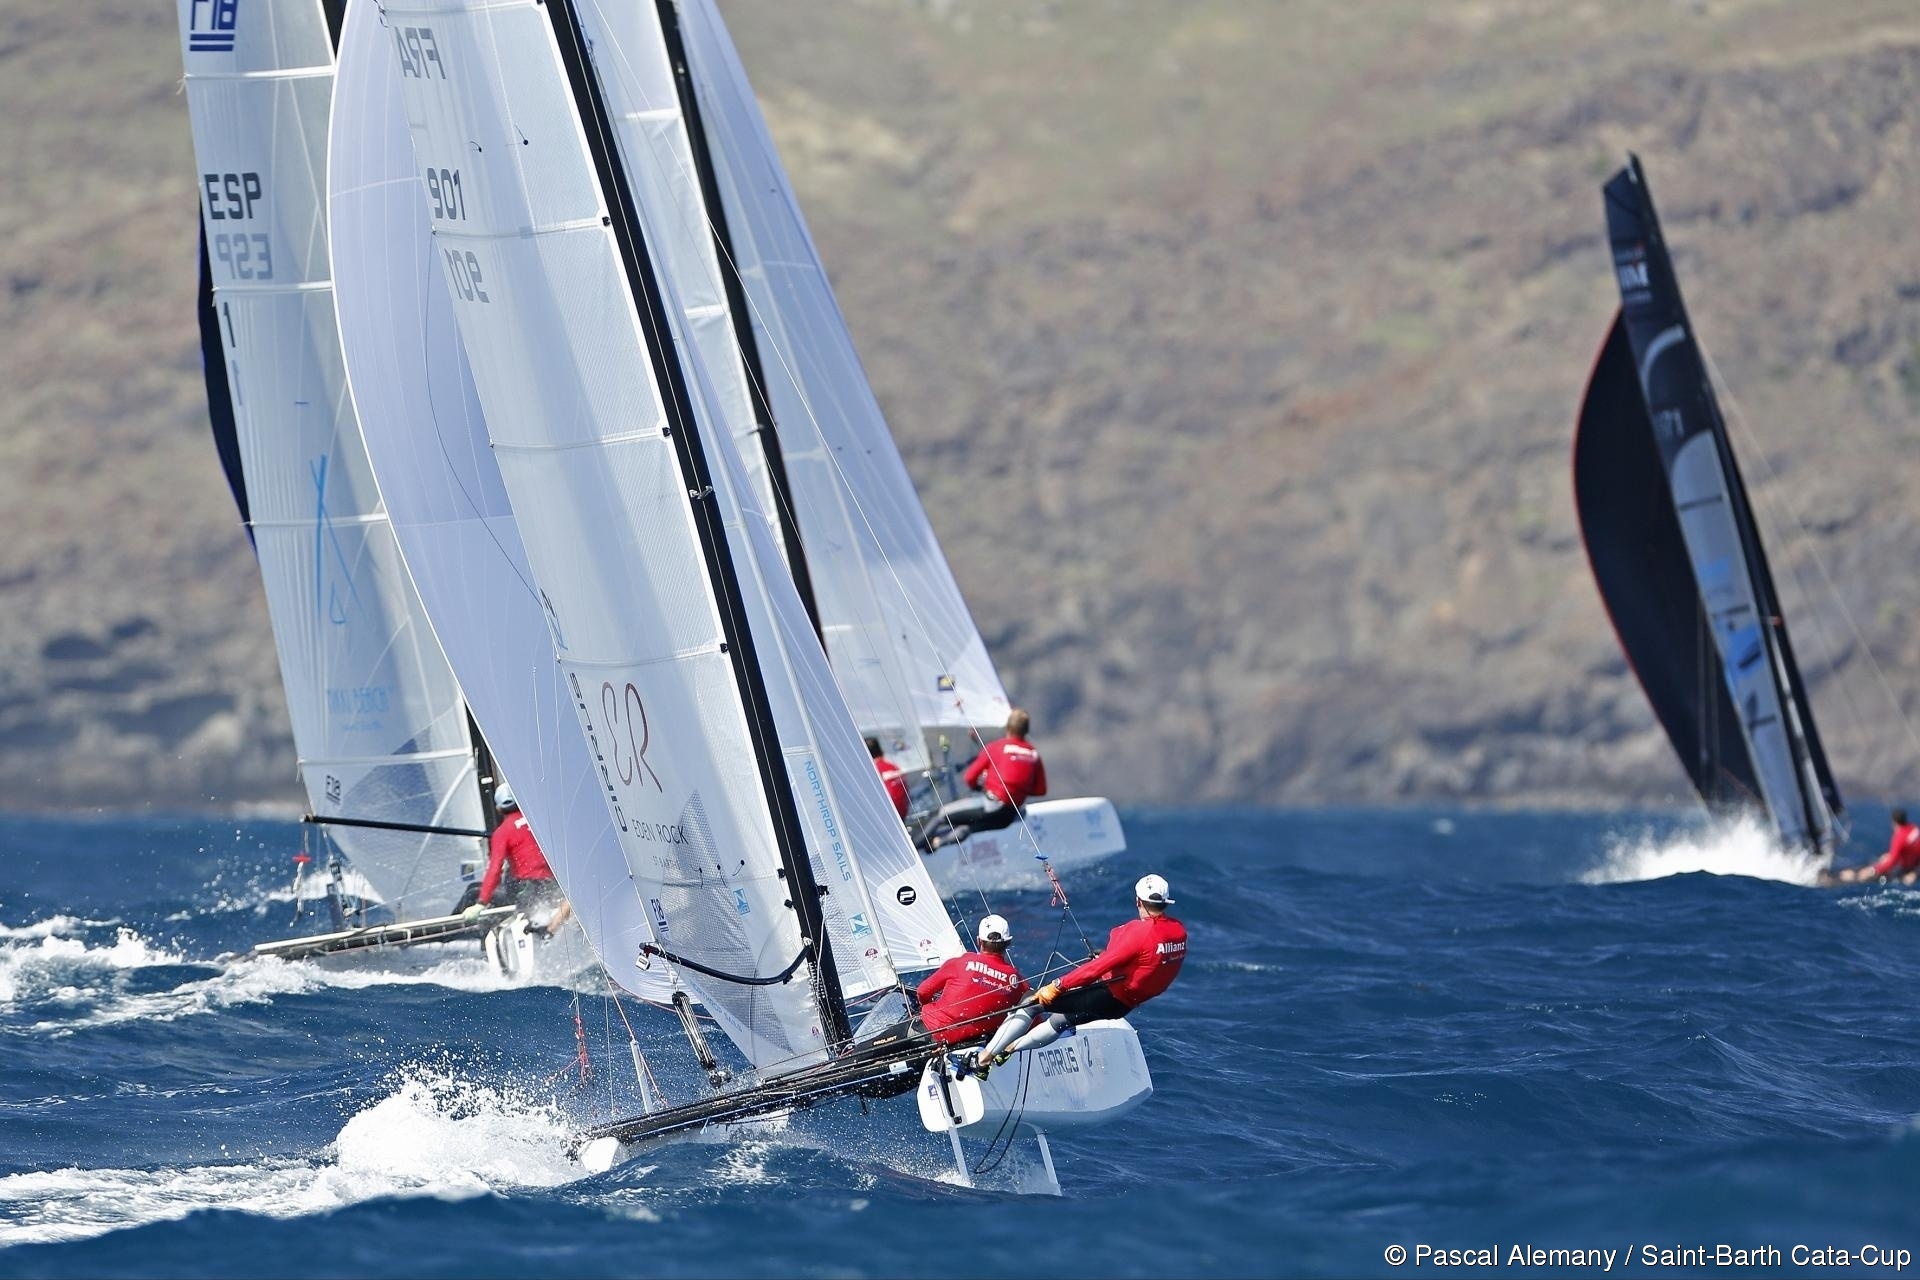  Multihulls  StBarth Cata Cup 2018, StBarthelemy FRA, final results, the Swiss